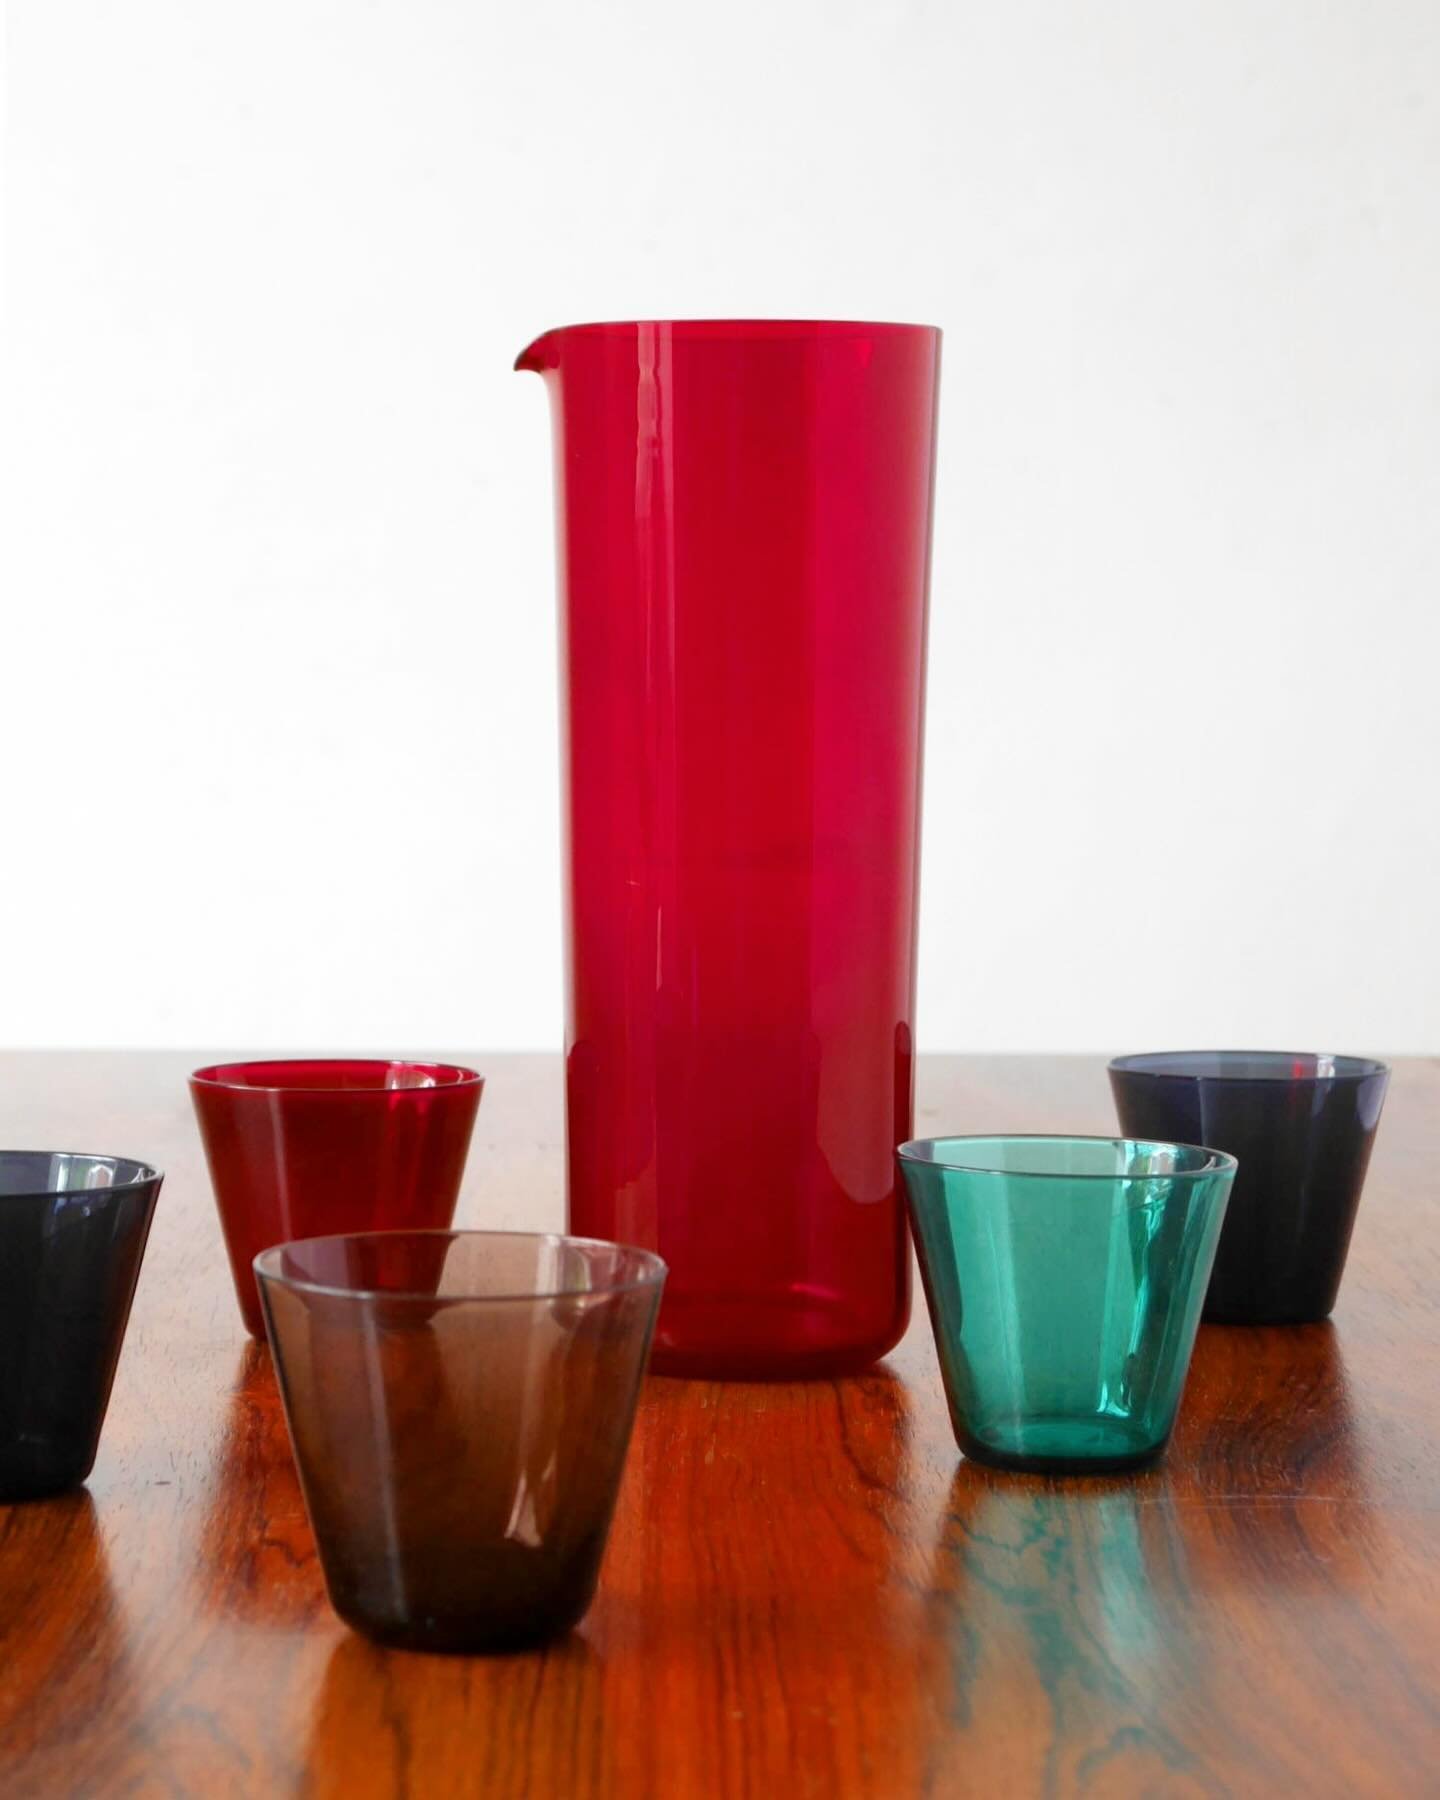 SALE - was &pound;245, now &pound;195 with free UK delivery (international please ask).

Stunning 1609 pitcher/jug and set of 5 Kimara small glasses by Finnish design master Kaj Franck and made by Nuutaj&auml;rvi Glassworks, 1954. 

The pitcher is fr